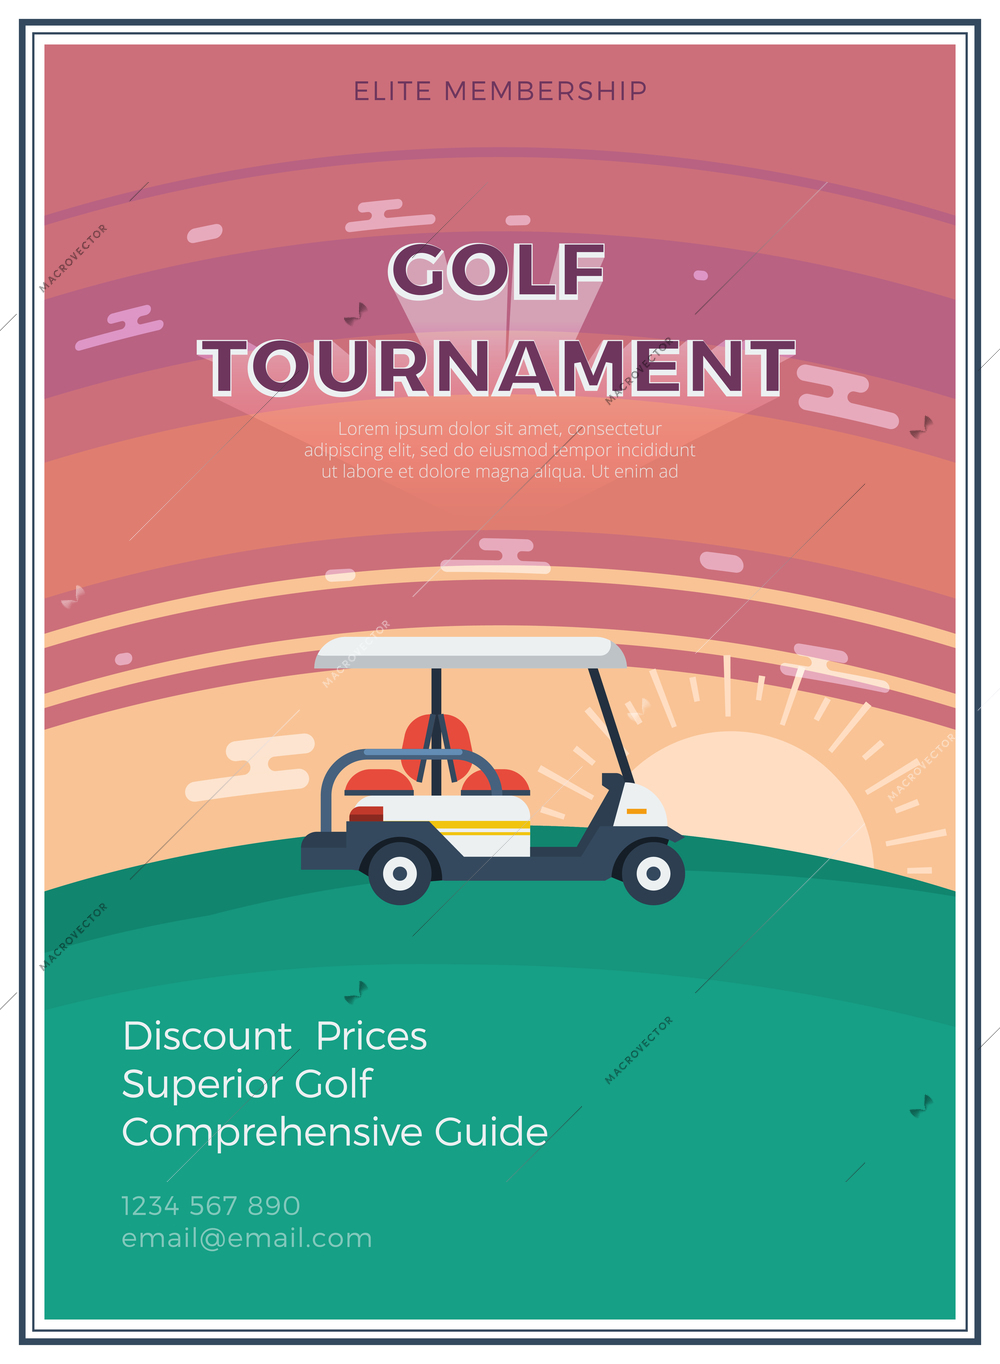 Elite membership golf tournament flat icon poster with email address and golf car at sunrise or sunset in the middle vector illustration